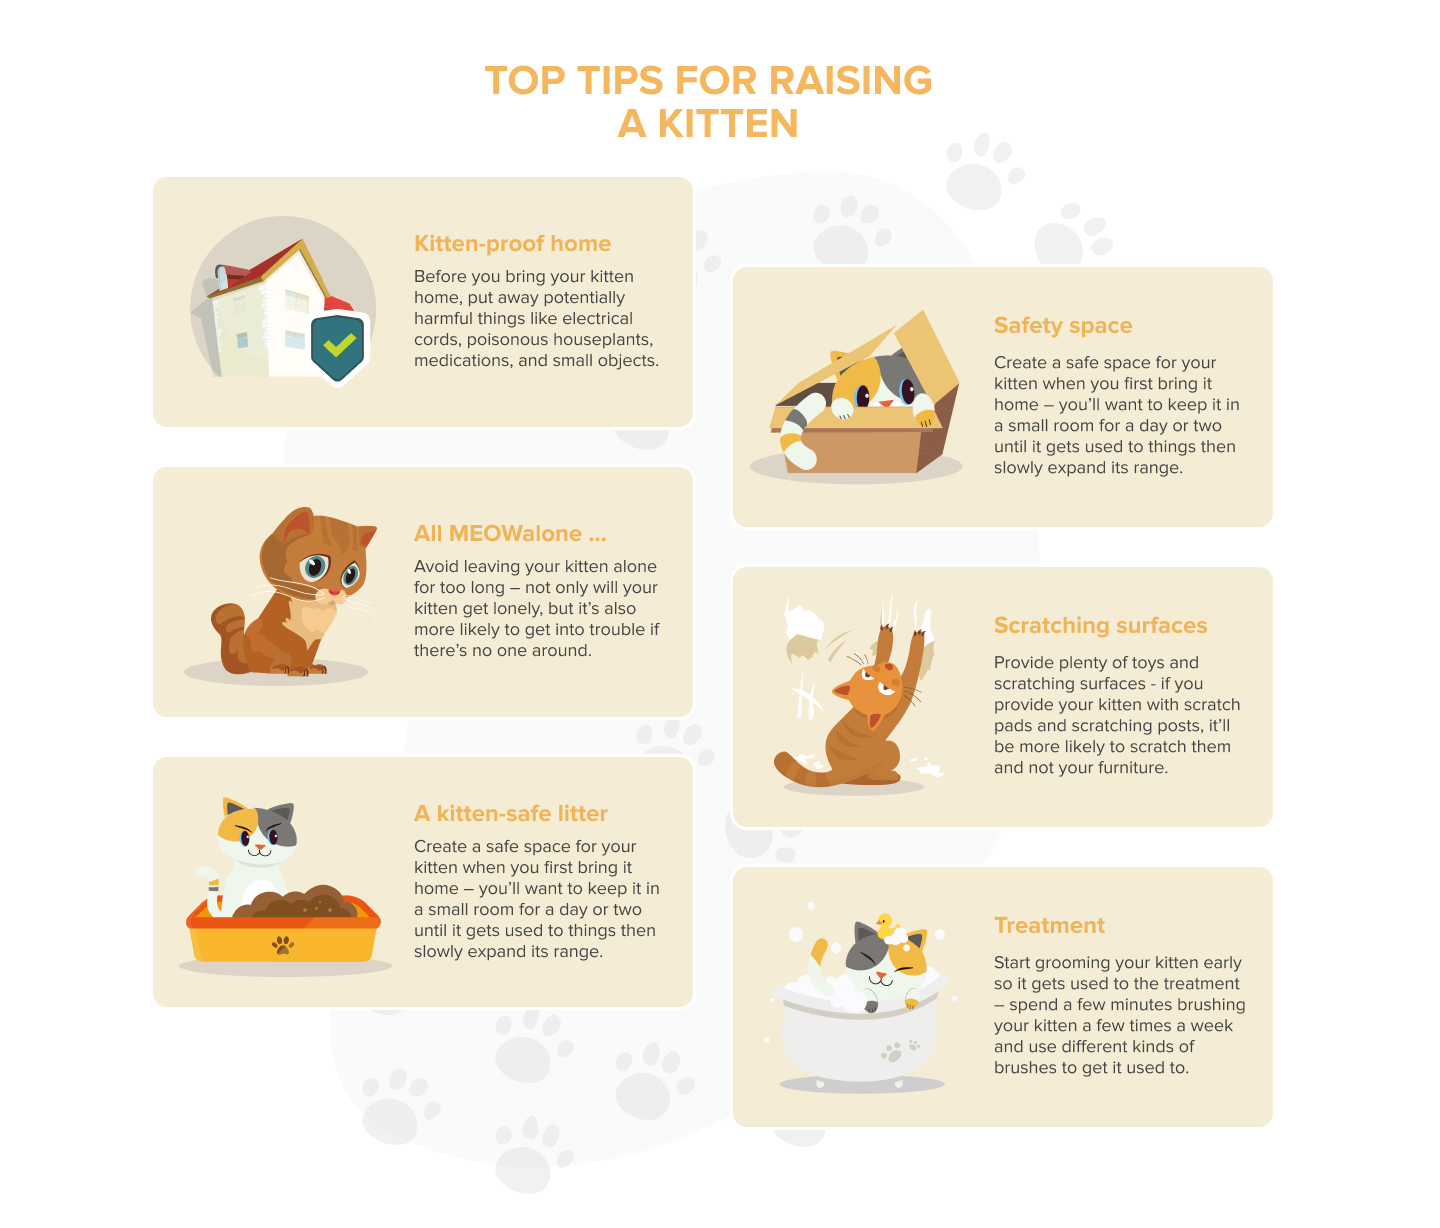 Image featuring top tips for raising a kitten.